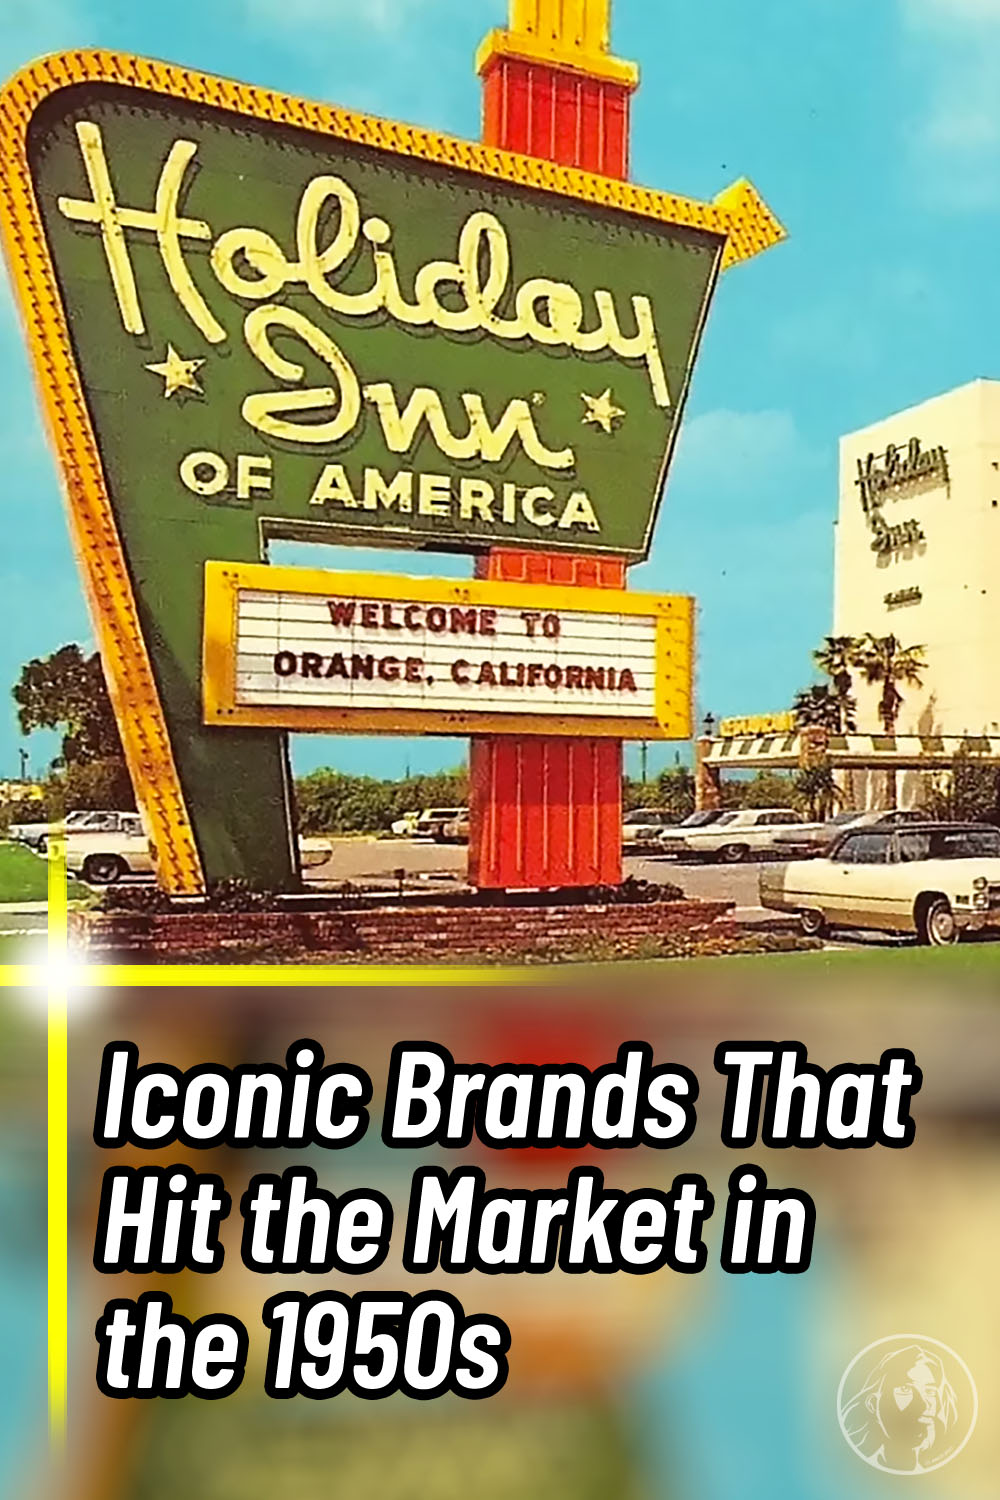 Iconic Brands That Hit the Market in the 1950s